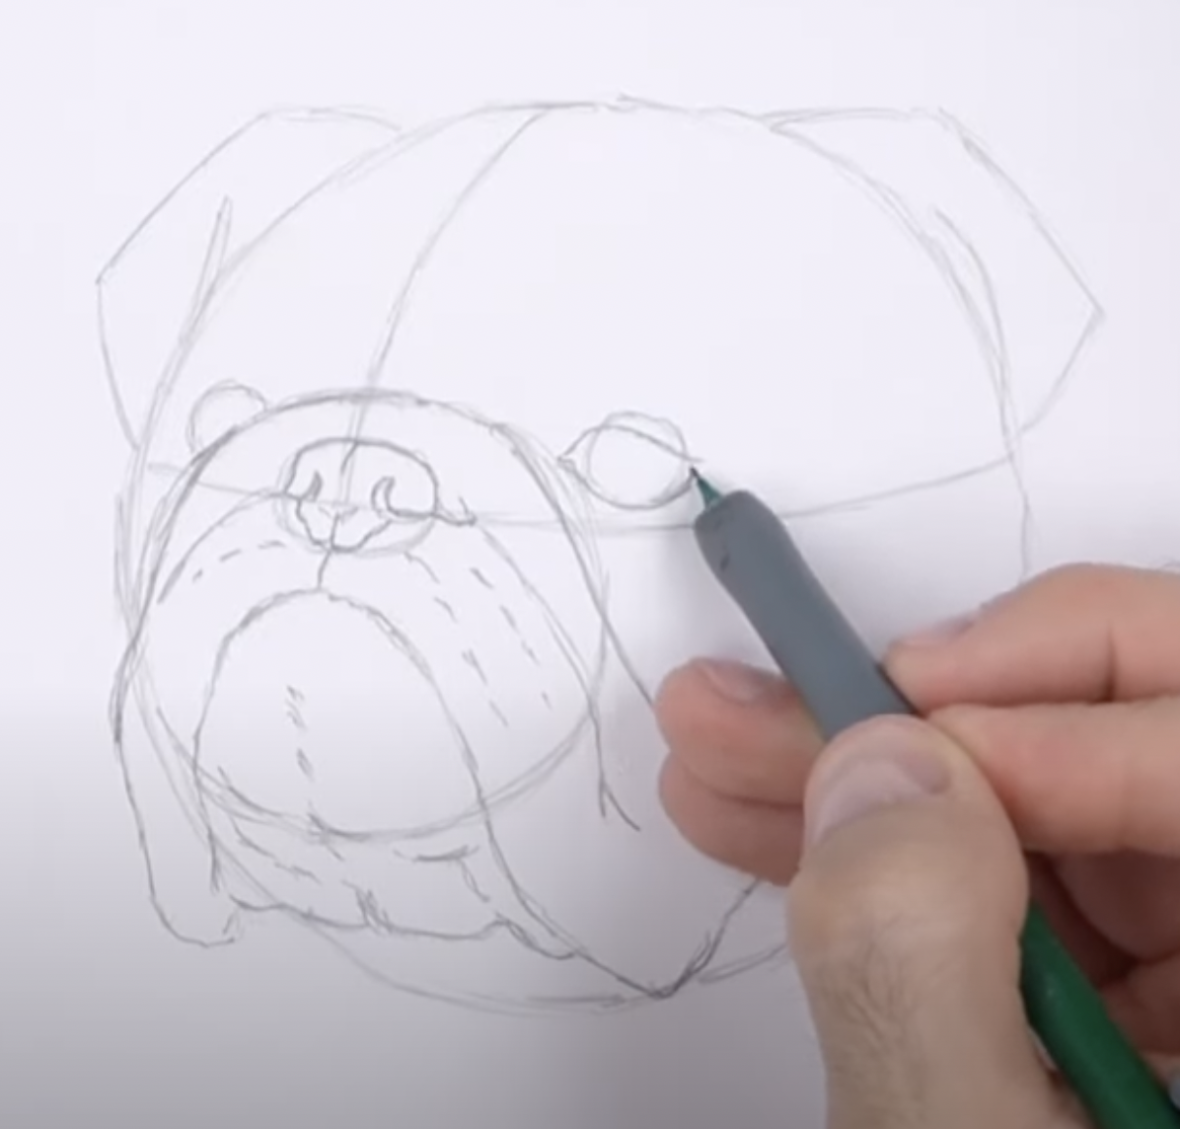 How to Draw a Bulldog Face